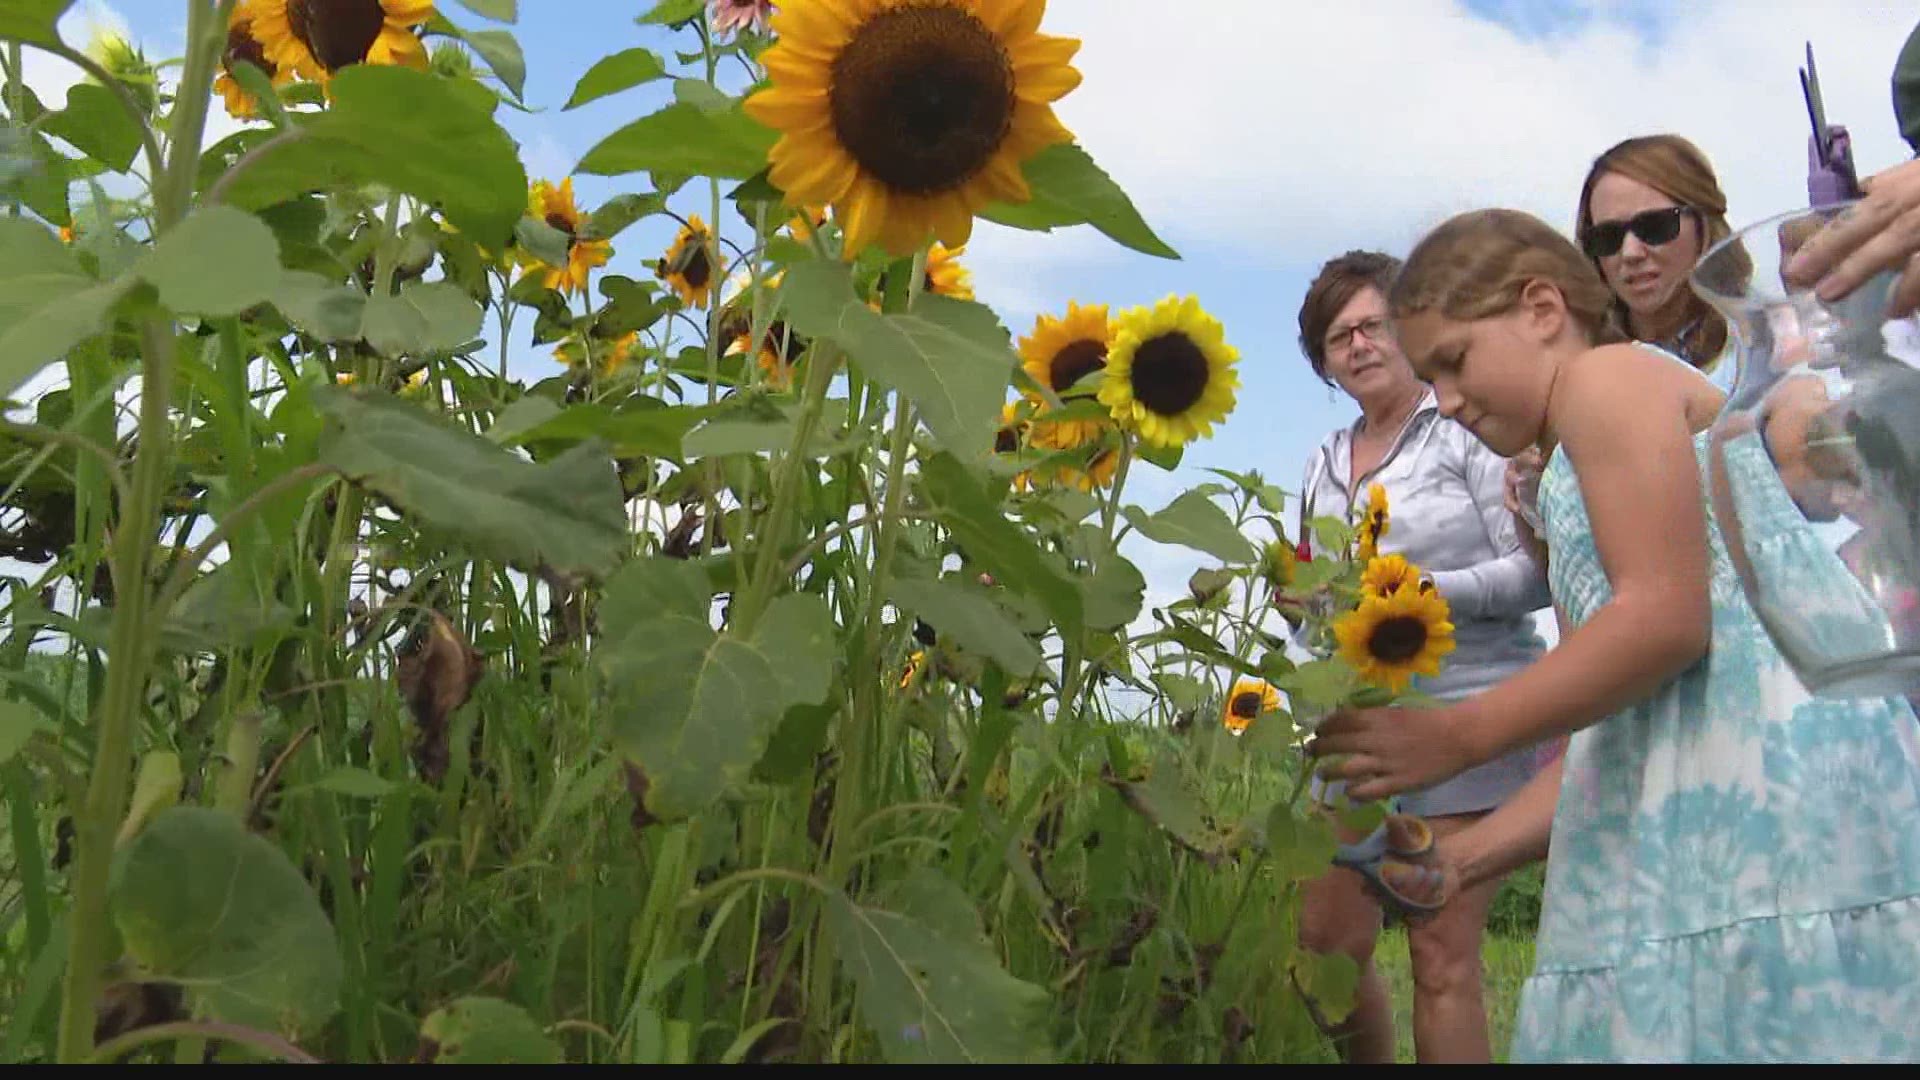 This flower-picking experience in Johnson County is like nothing you've seen before.